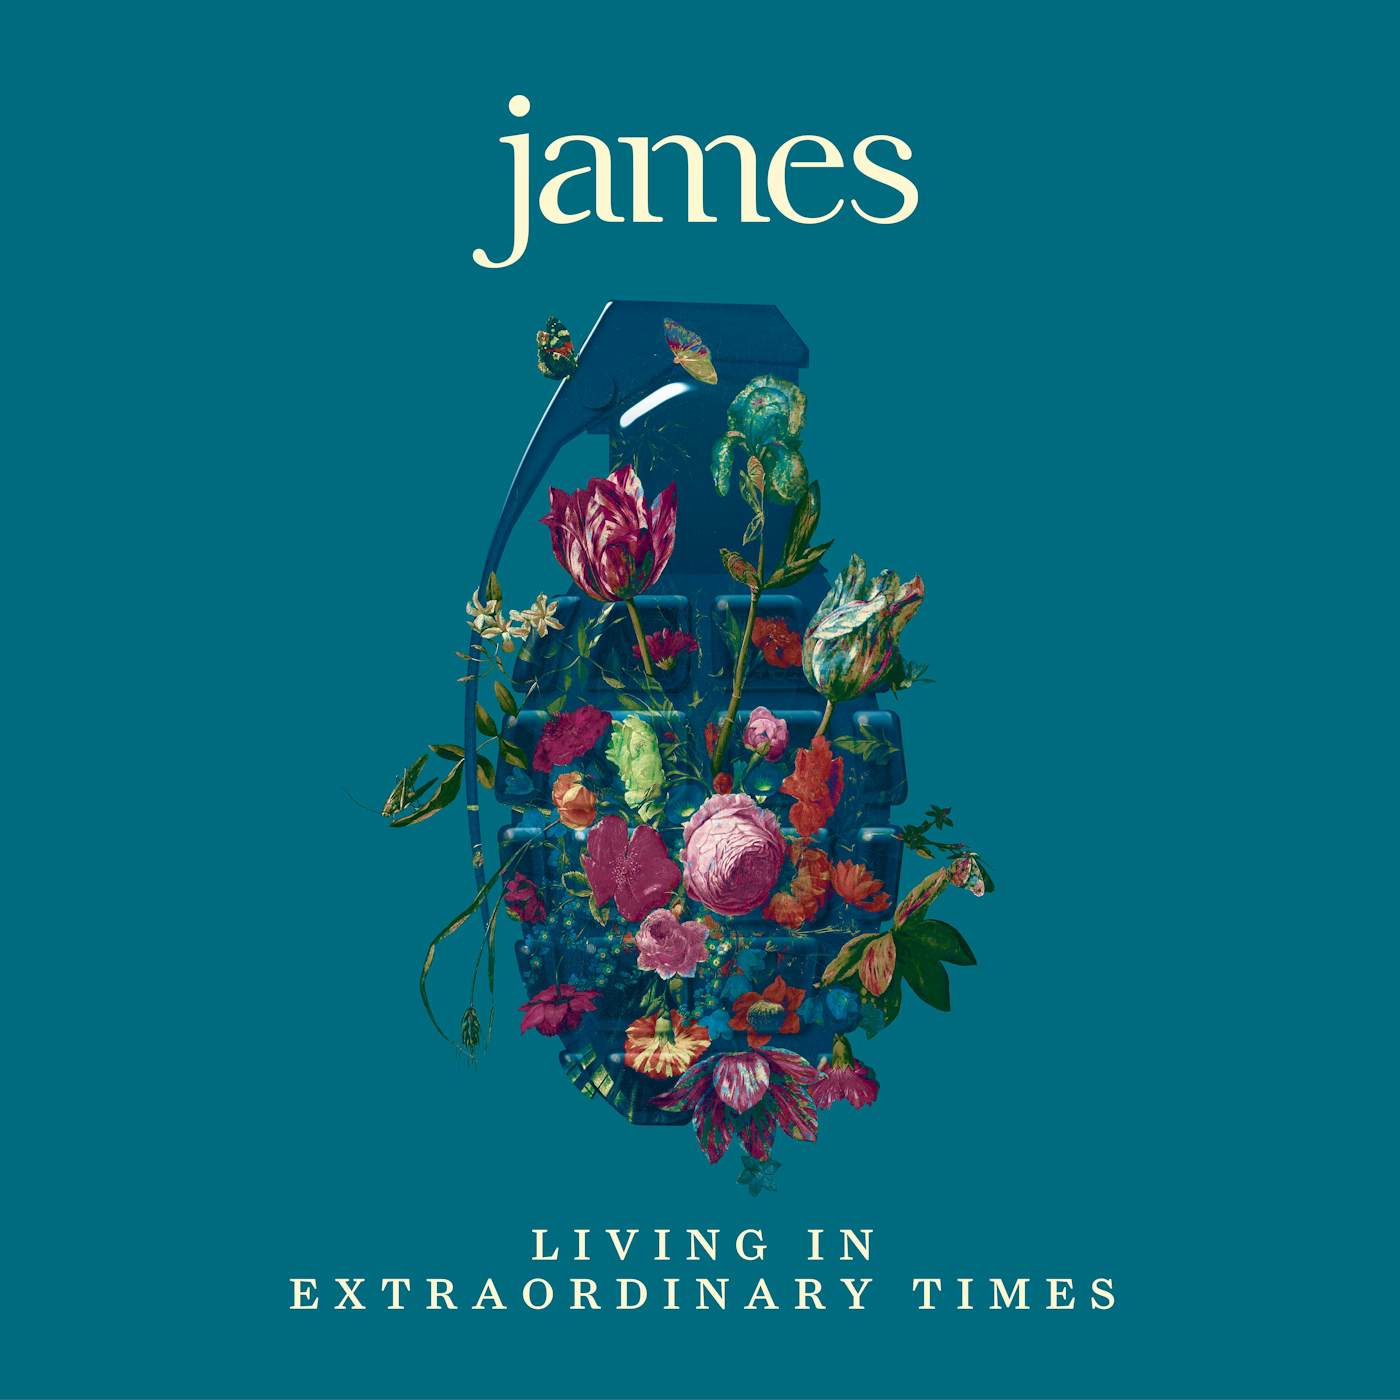 James Living in Extraordinary Times Vinyl Record